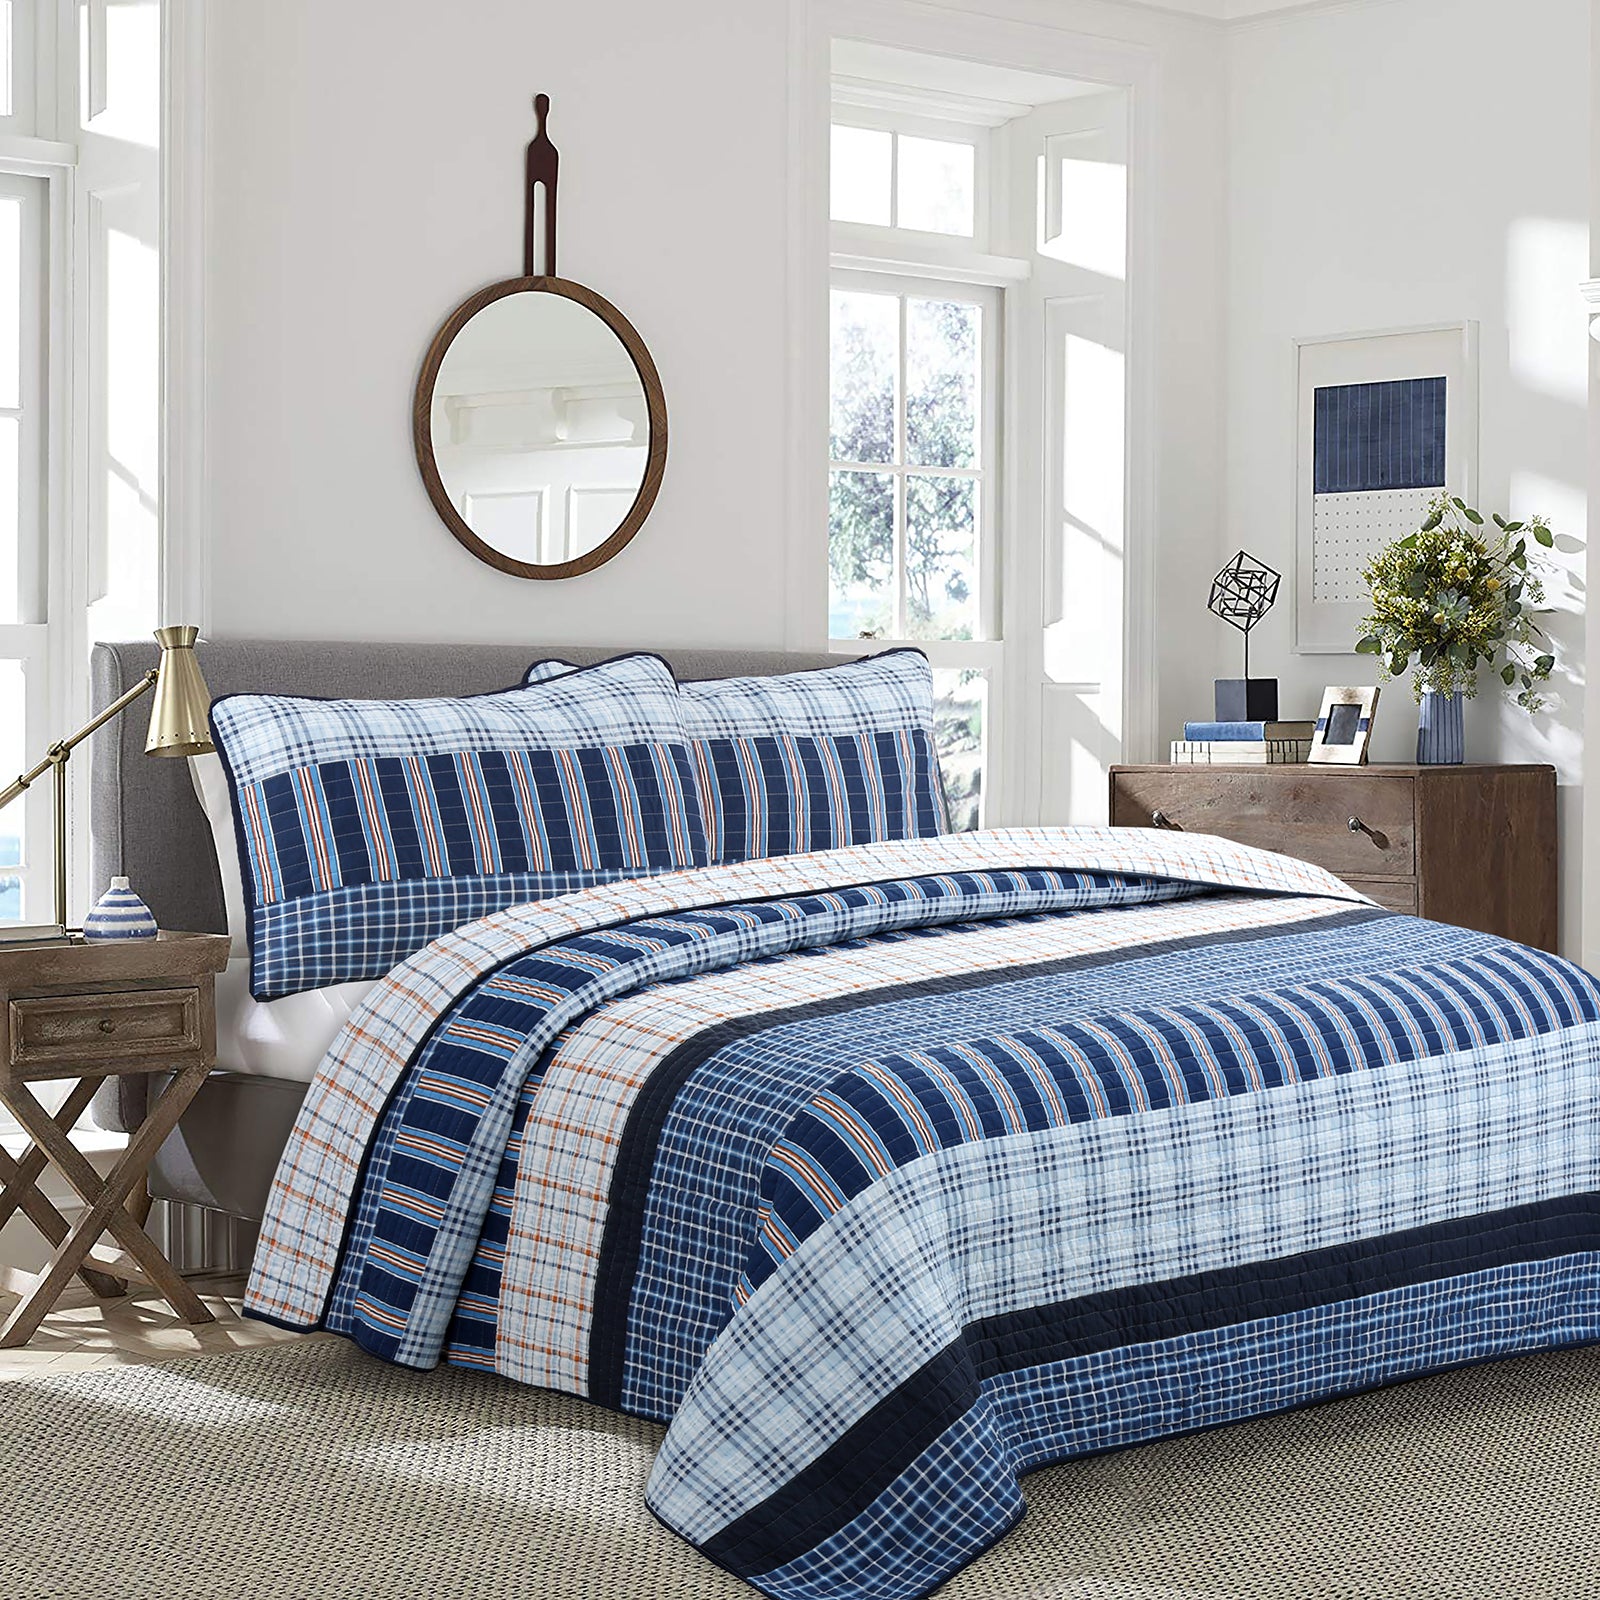 Salina Navy Stripped Plaid Print Patchwork Cotton Reversible Quilt Bed –  Cozy Line Home Fashions